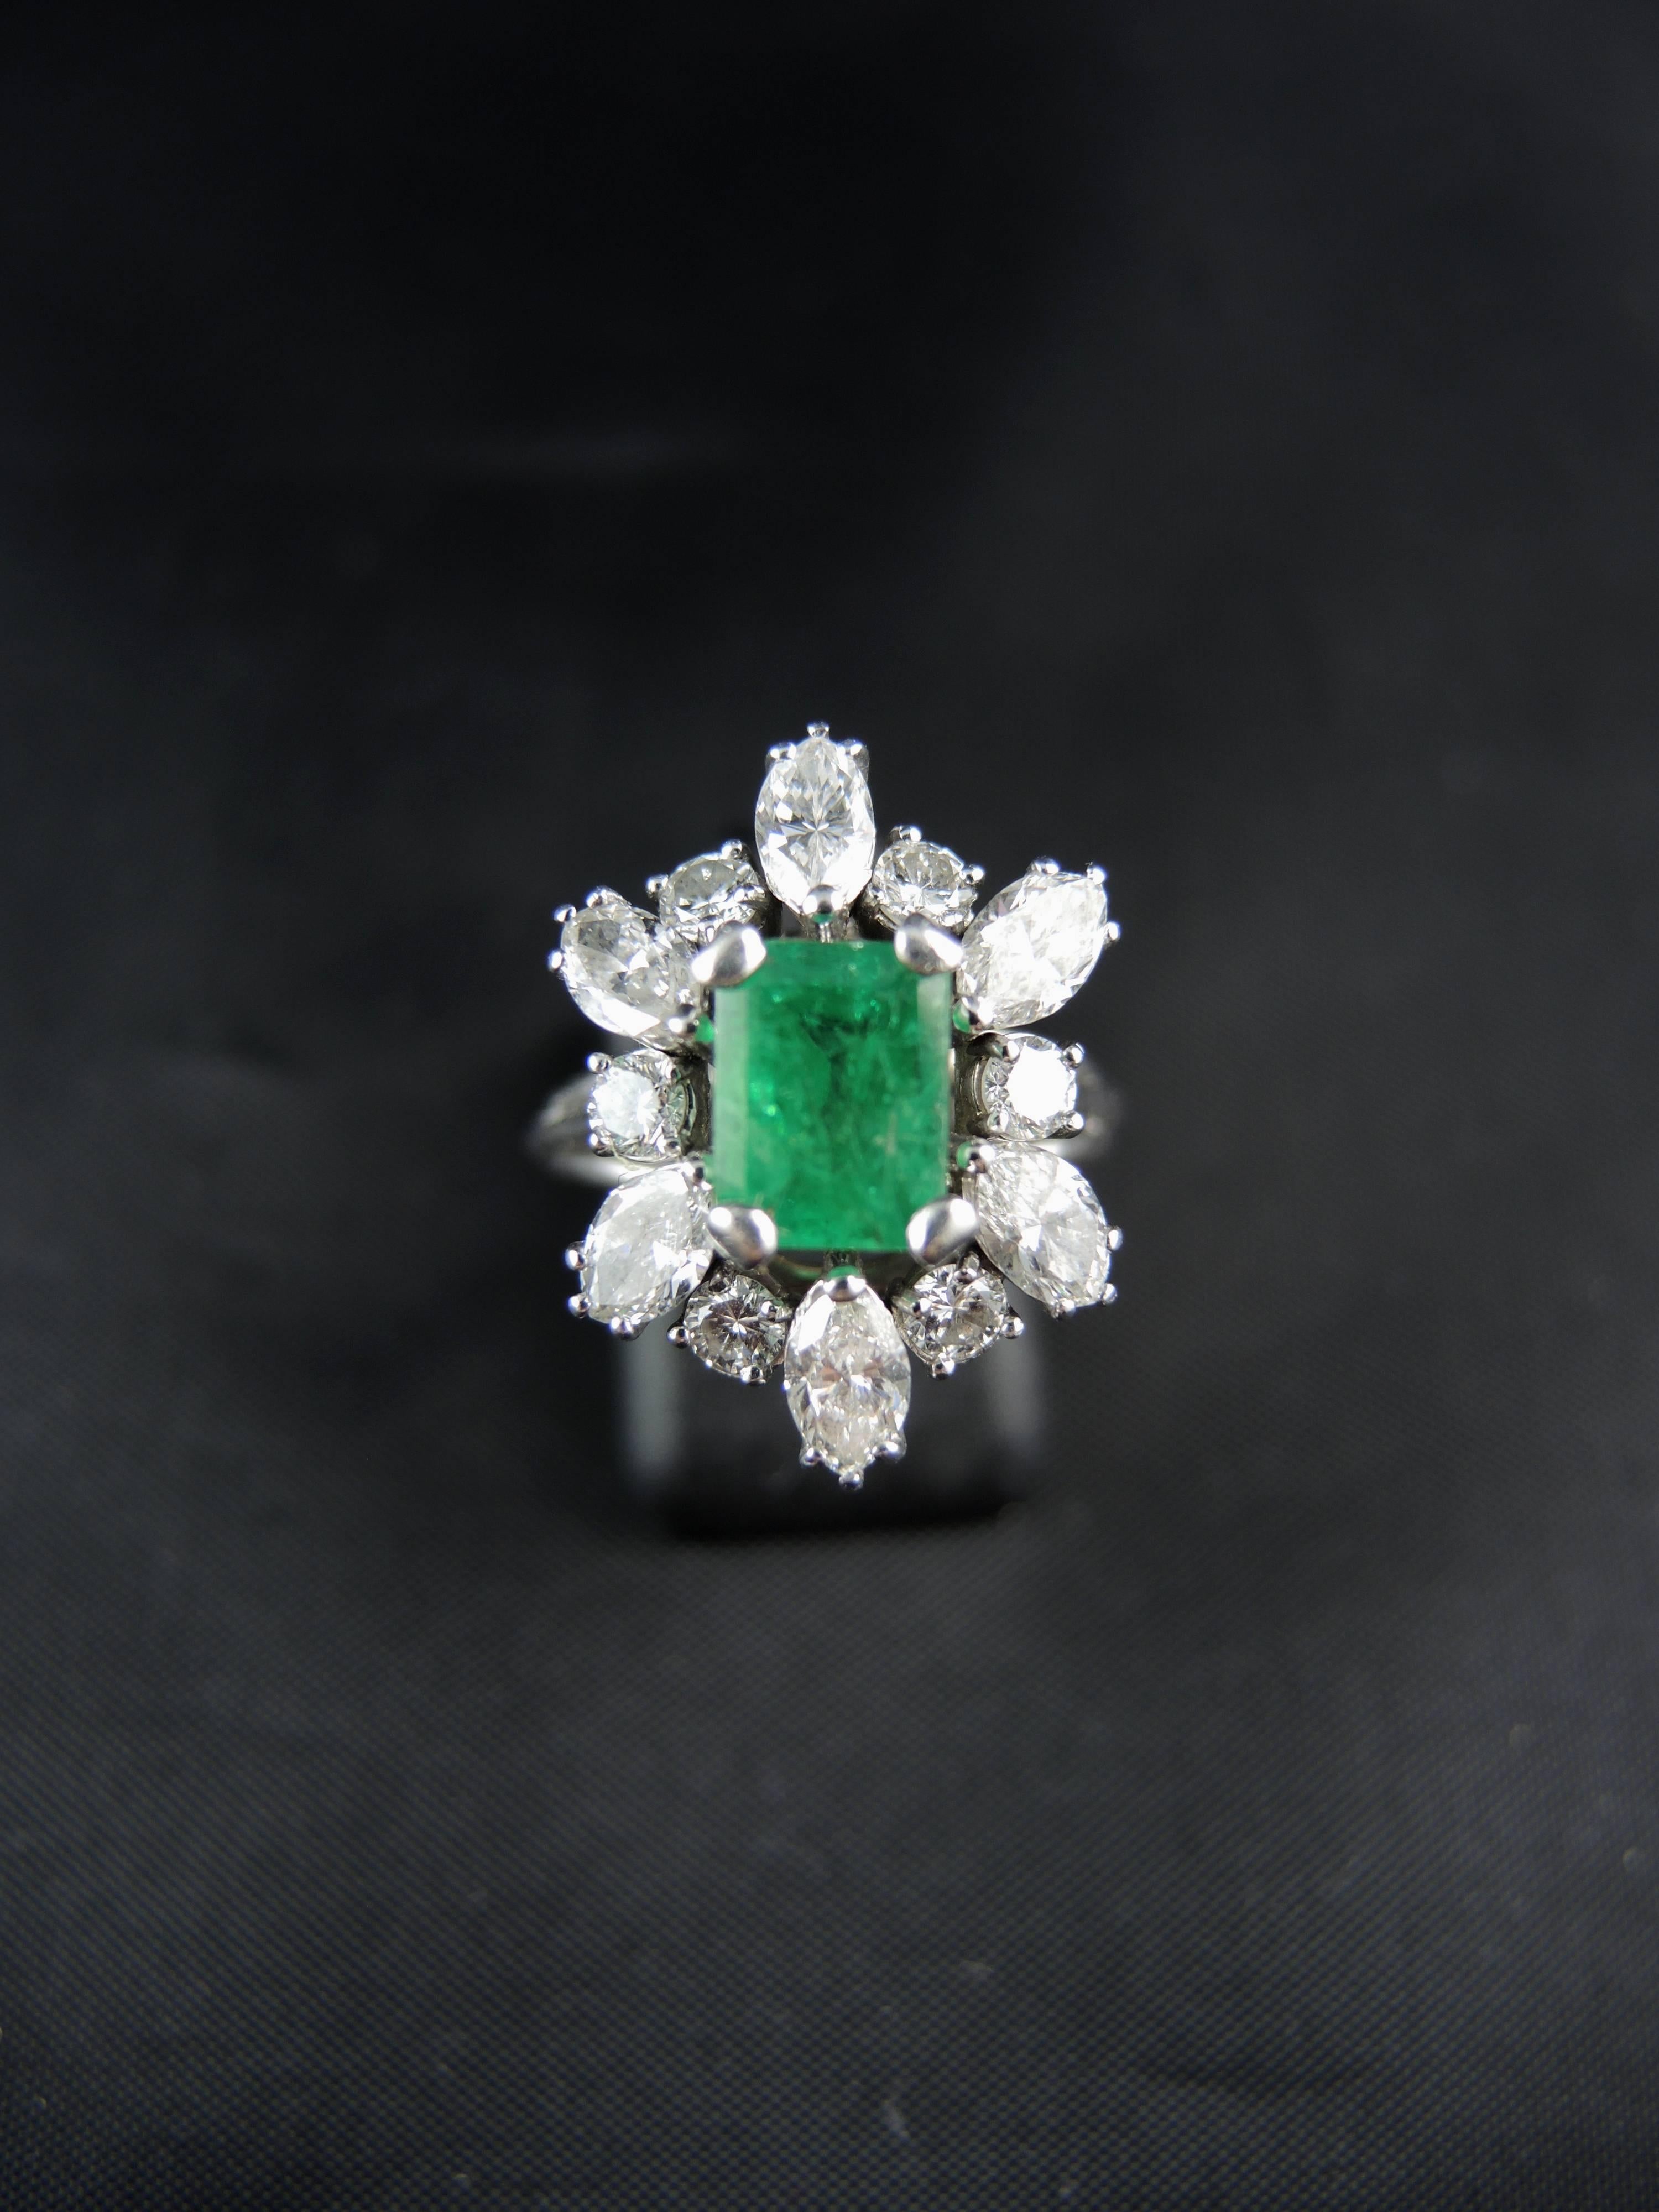 18 Kt white gold and platinium cluster ring (quality mark: head of eagle and dog) set with a central emerald cut emerald, weight estimated around 1,45 Cts, surrounded with modern brilliant  and navette cut diamonds, which total weight is estimated